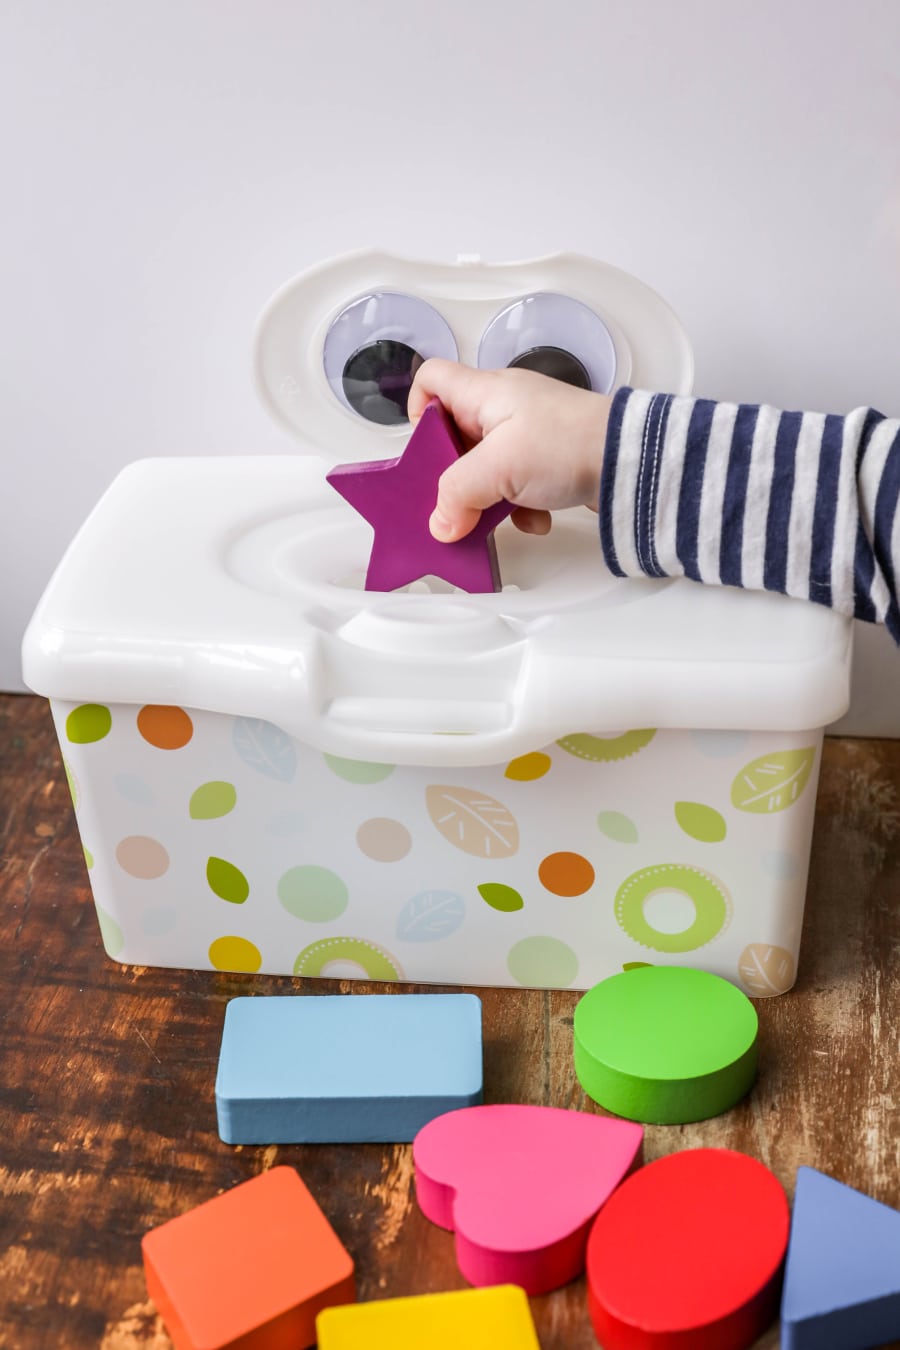 Turn a wibes tub into a learning toy and storage box for the kids!